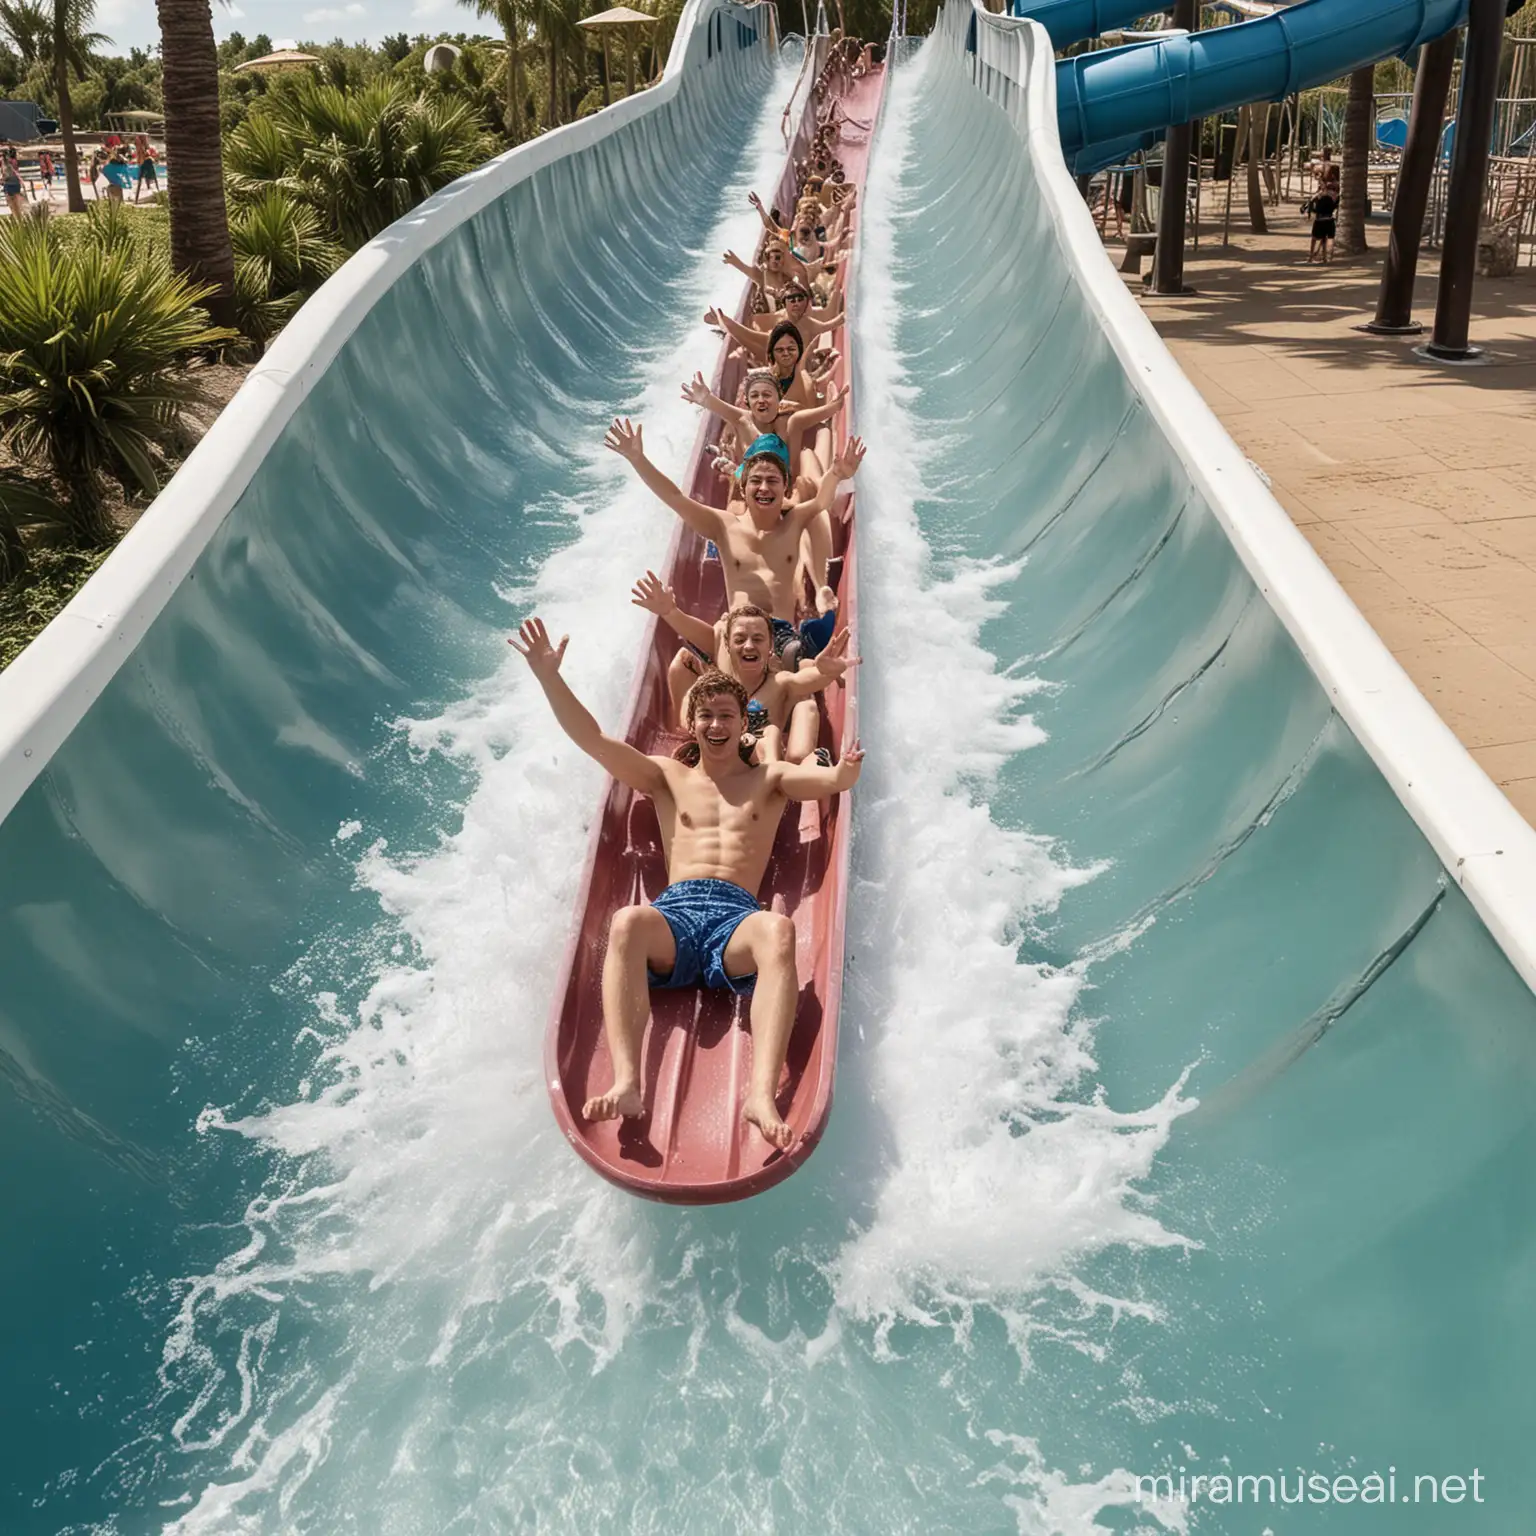 young people going down a slide in a water park